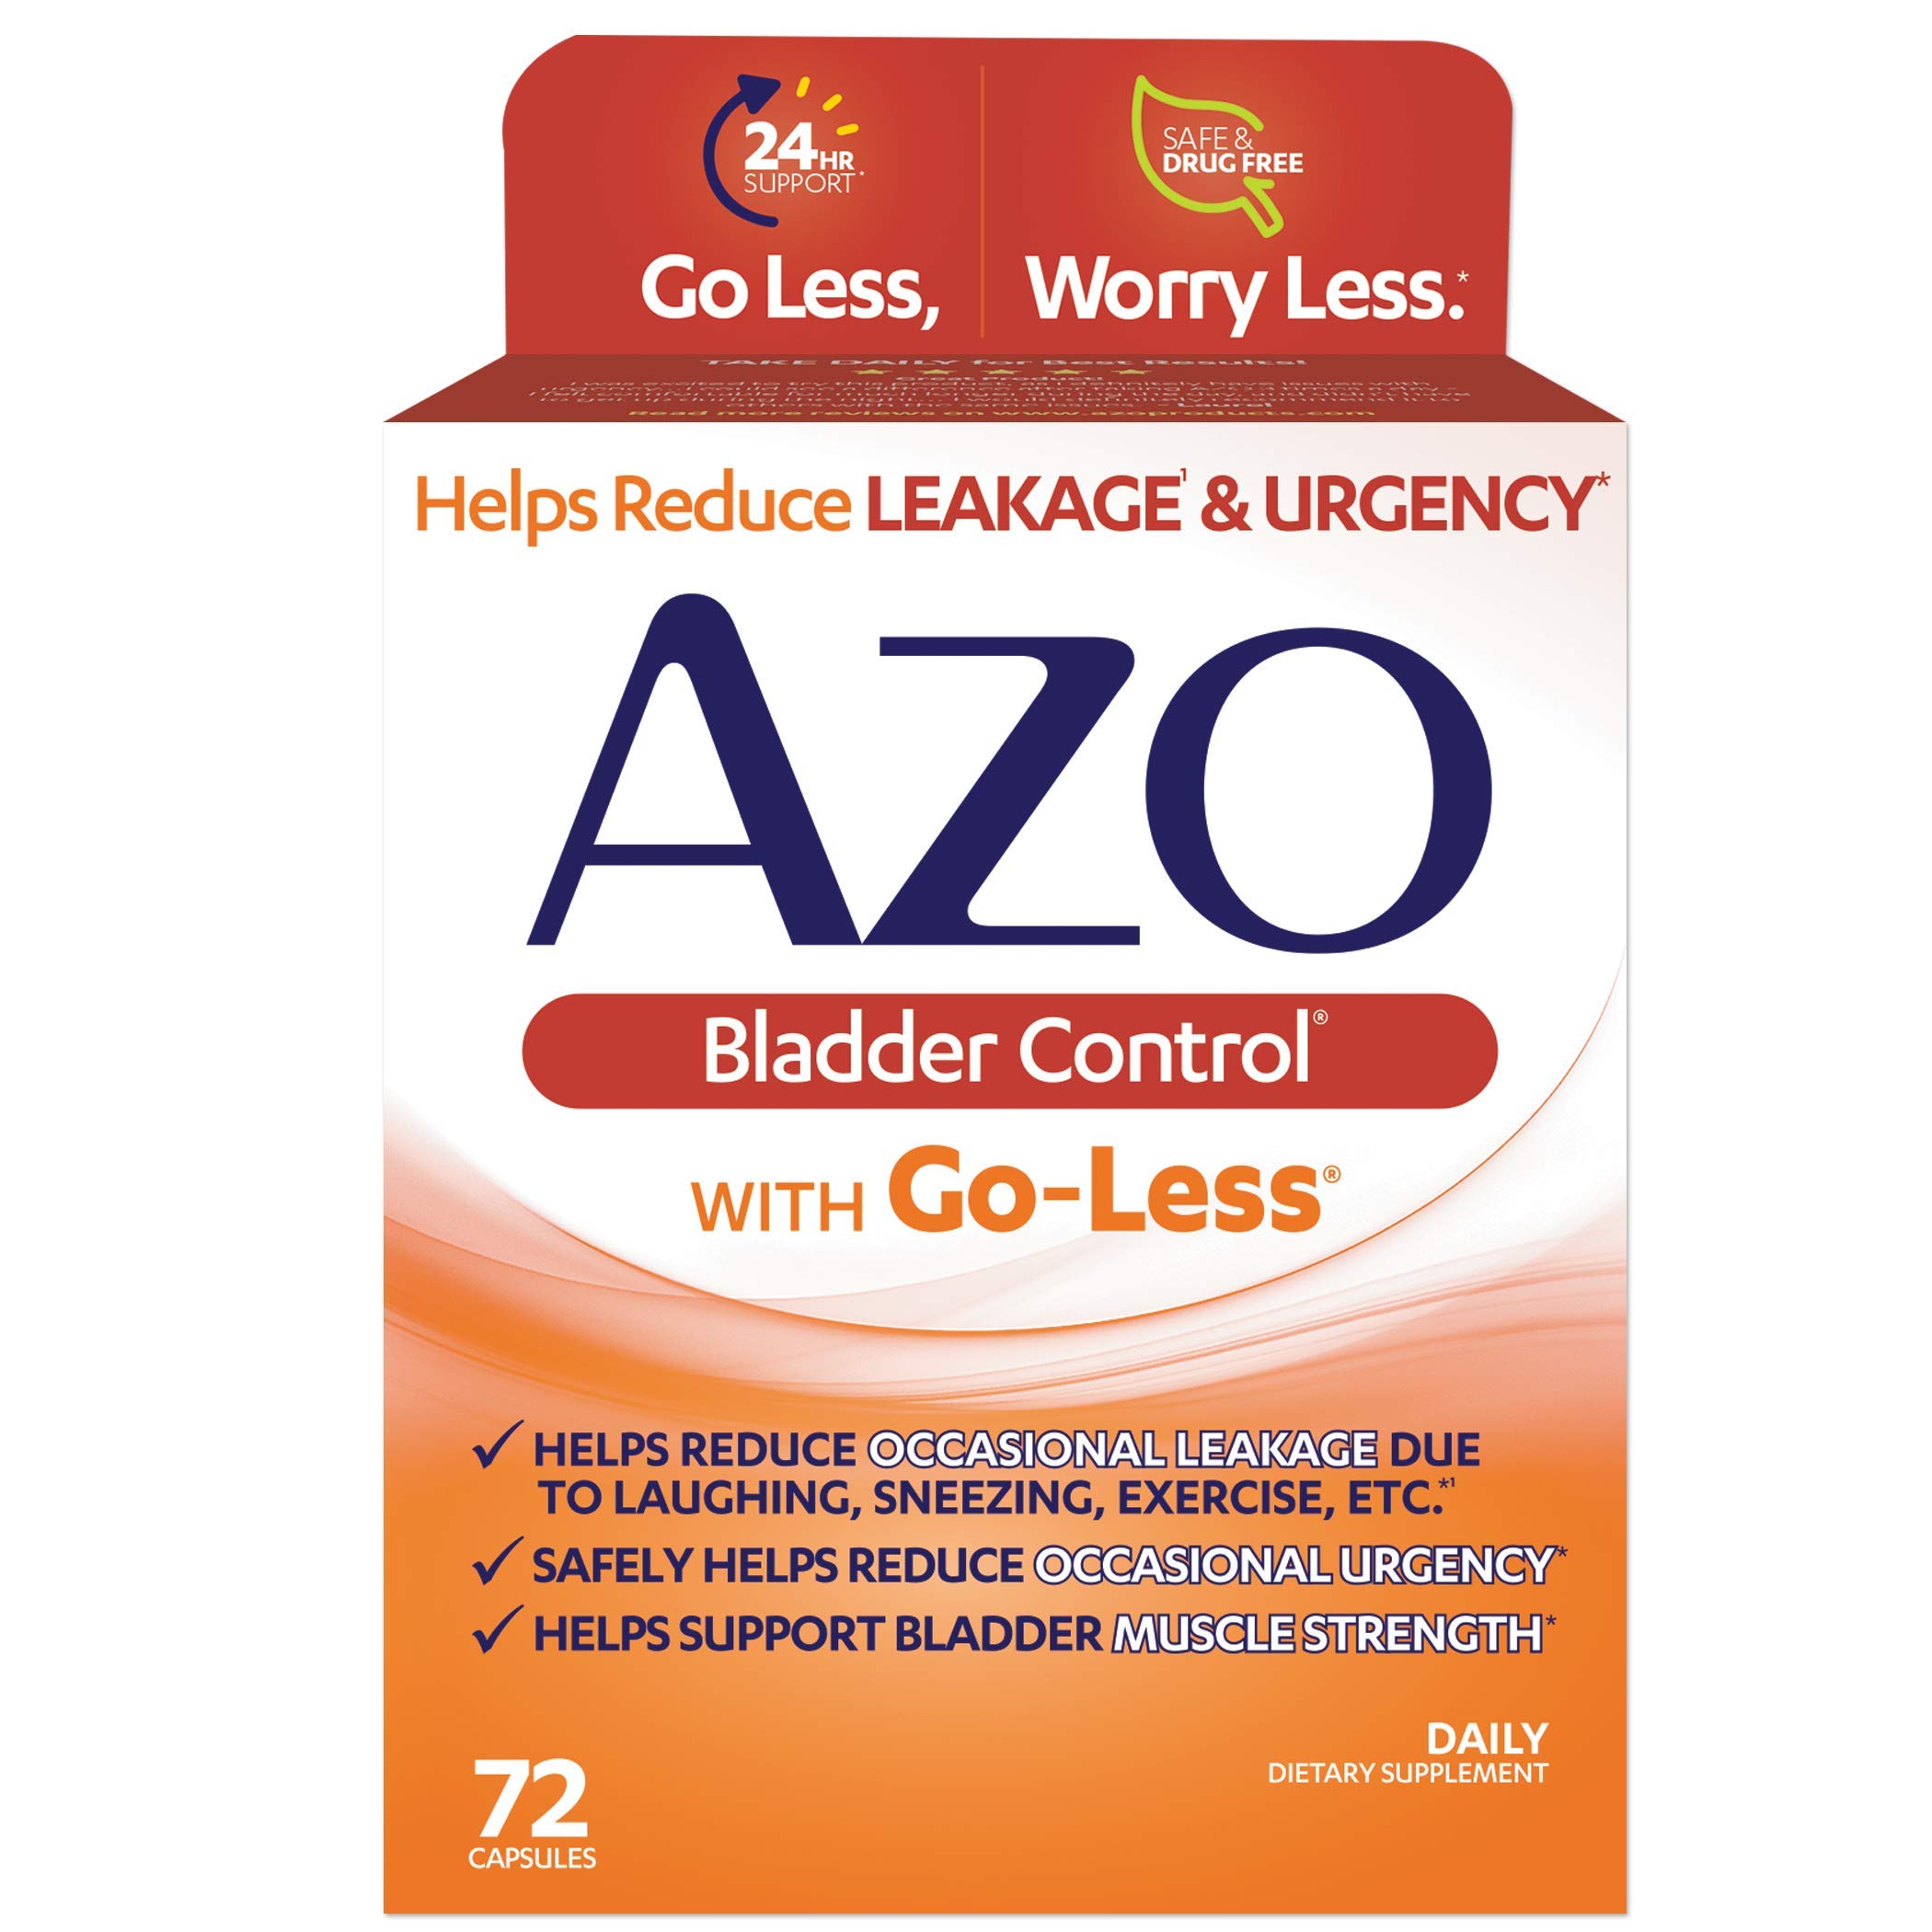 AZO Bladder Control with Go-Less Daily Supplement | Helps Reduce Occasional Urgency* | Helps reduce occasional leakage due to laughing, sneezing and exercise††† | 72 Capsules